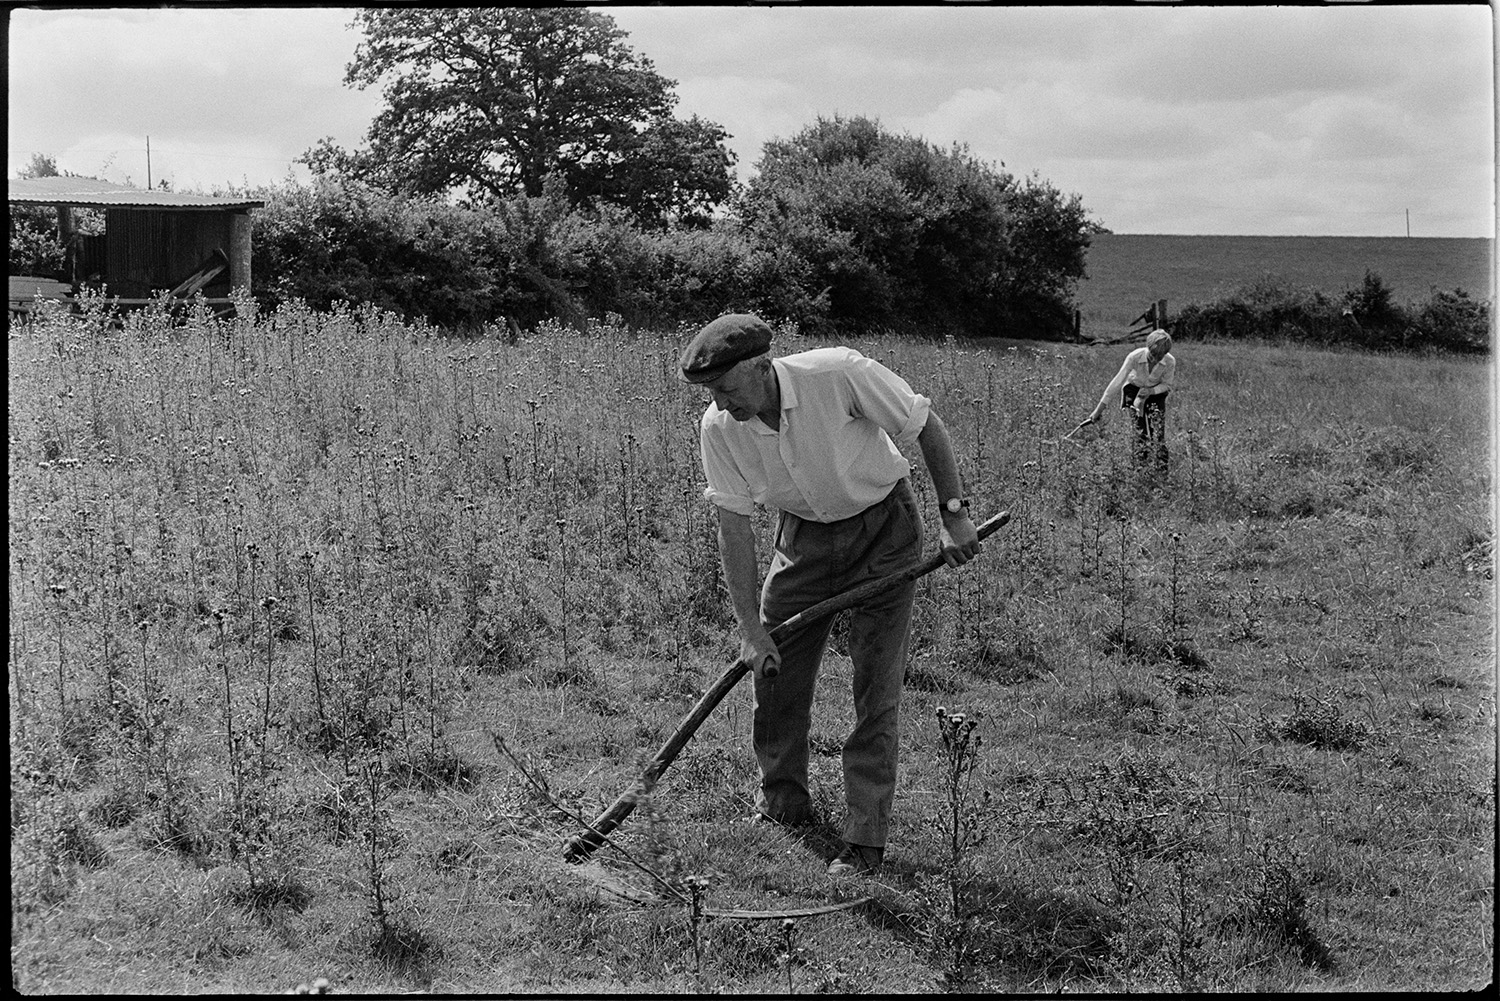 Man scything thistles. 
[A man, possibly Mr Allin, scything thistles in a field on Rectory Road, Dolton. Another person is also cutting thistles in the background, possibly using a billhook.]